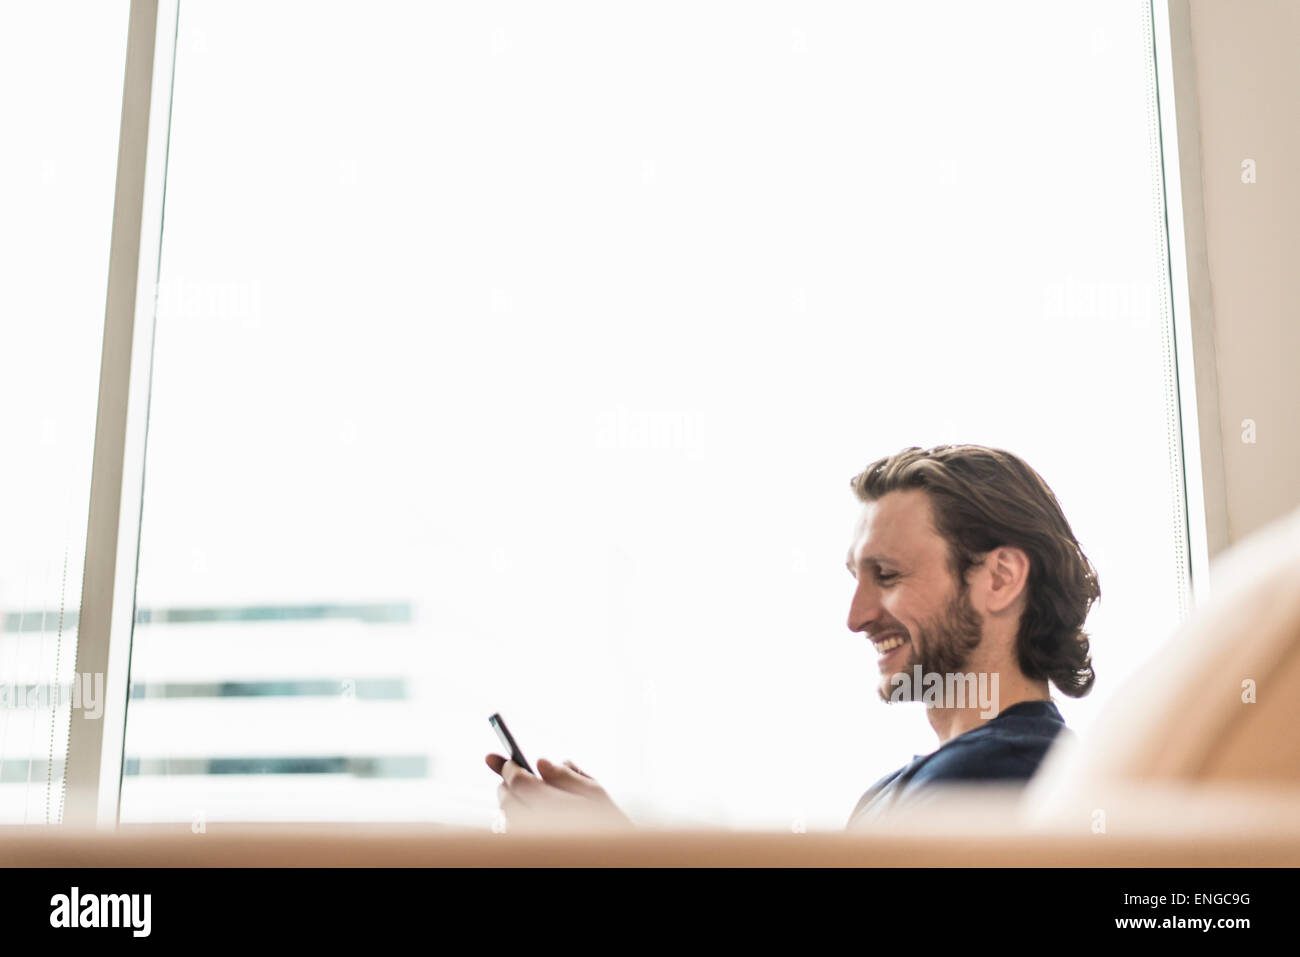 A man seated checking his smart phone and laughing. Stock Photo